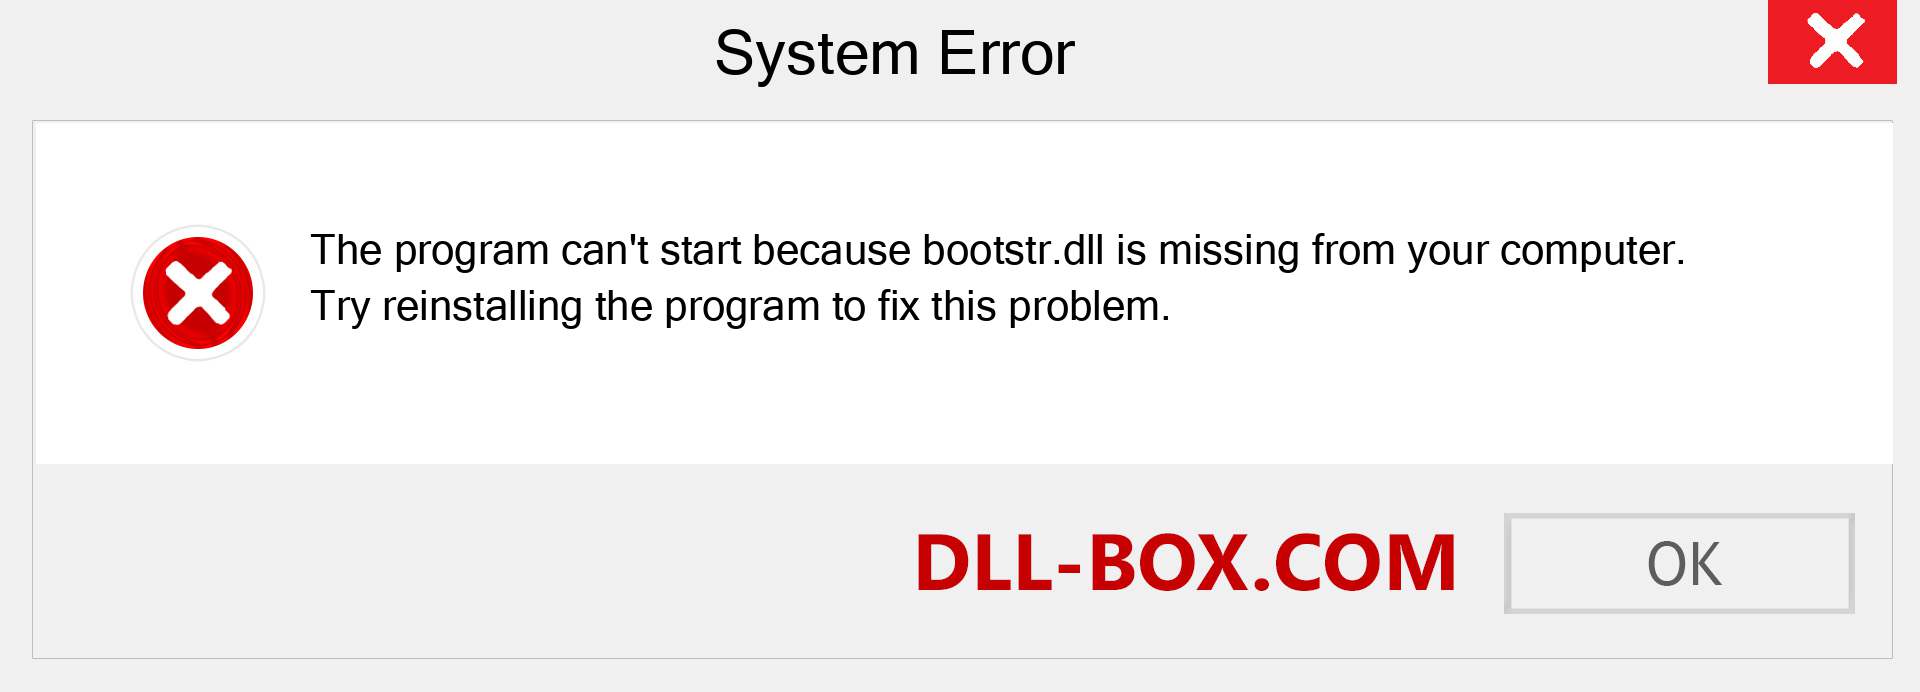  bootstr.dll file is missing?. Download for Windows 7, 8, 10 - Fix  bootstr dll Missing Error on Windows, photos, images